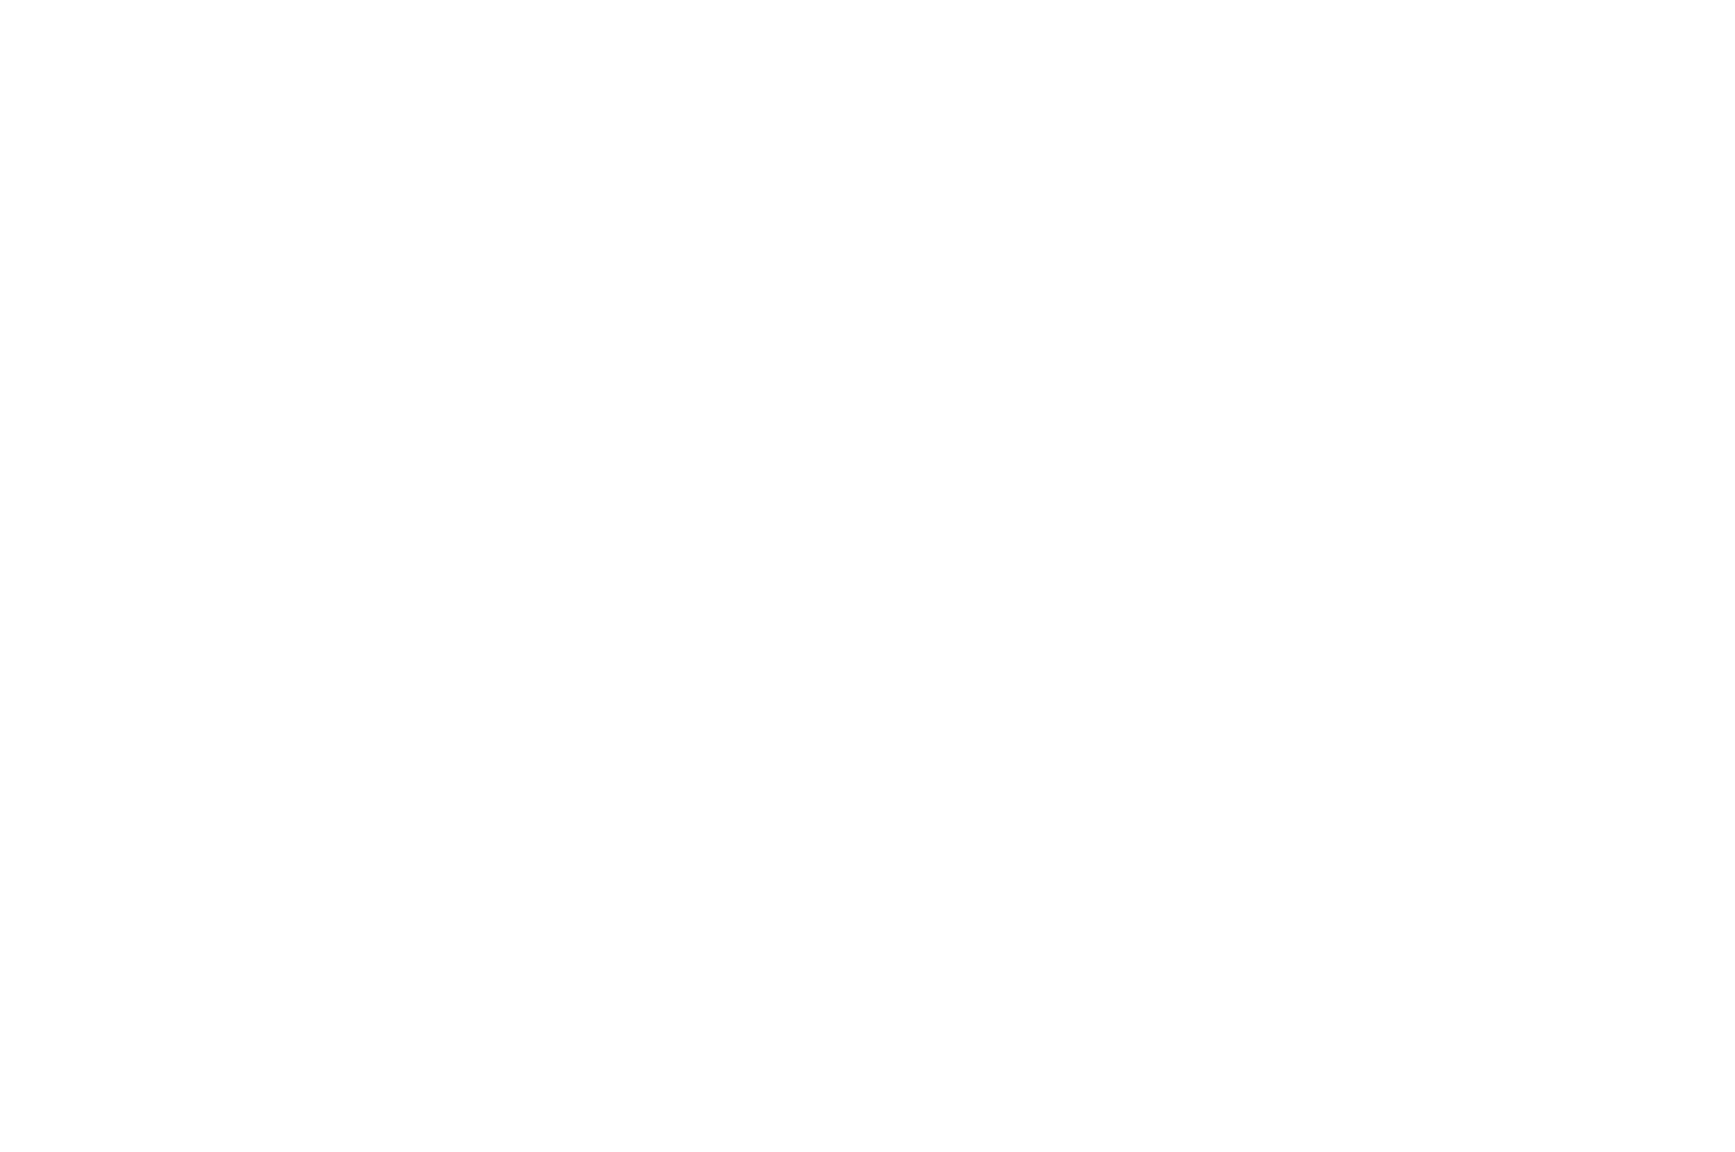 OFFICIAL SELECTION - Black Cat Picture Show - 2023.png